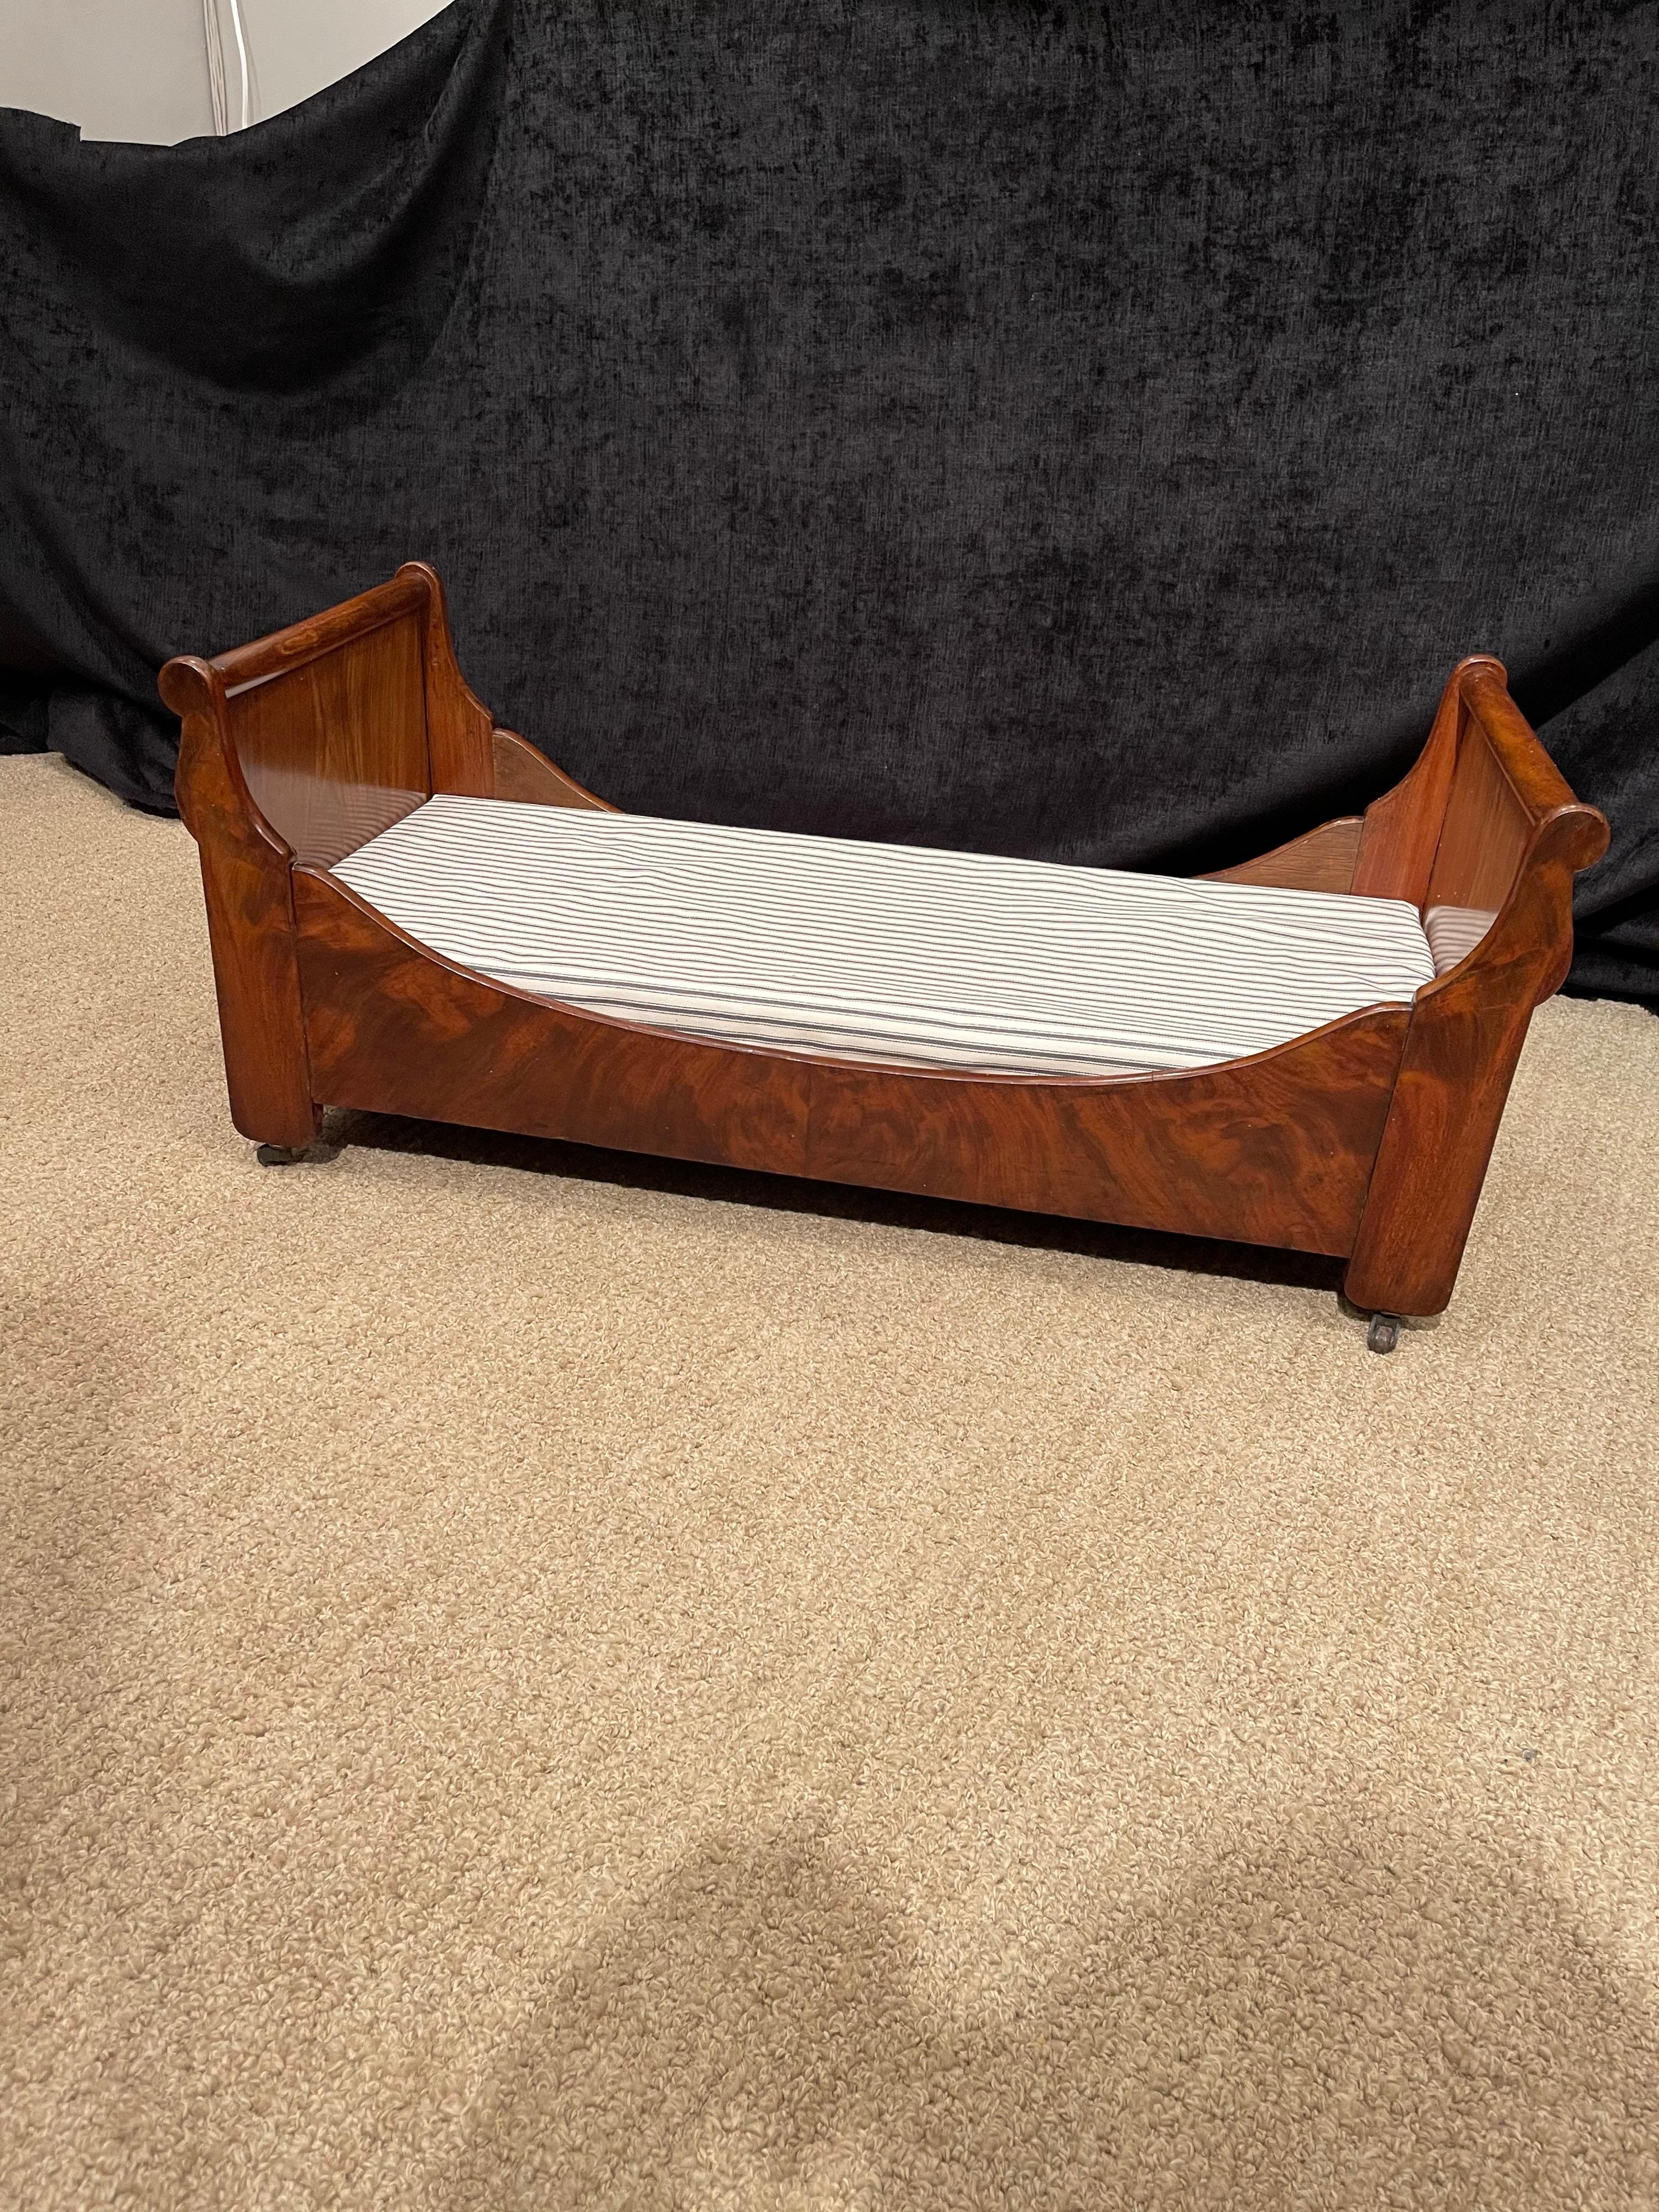 This rare cabinet makers example of an antique Empire mahogany sleigh bed,
As Dog bed. With new poly foam bed covered in black & white ticking.